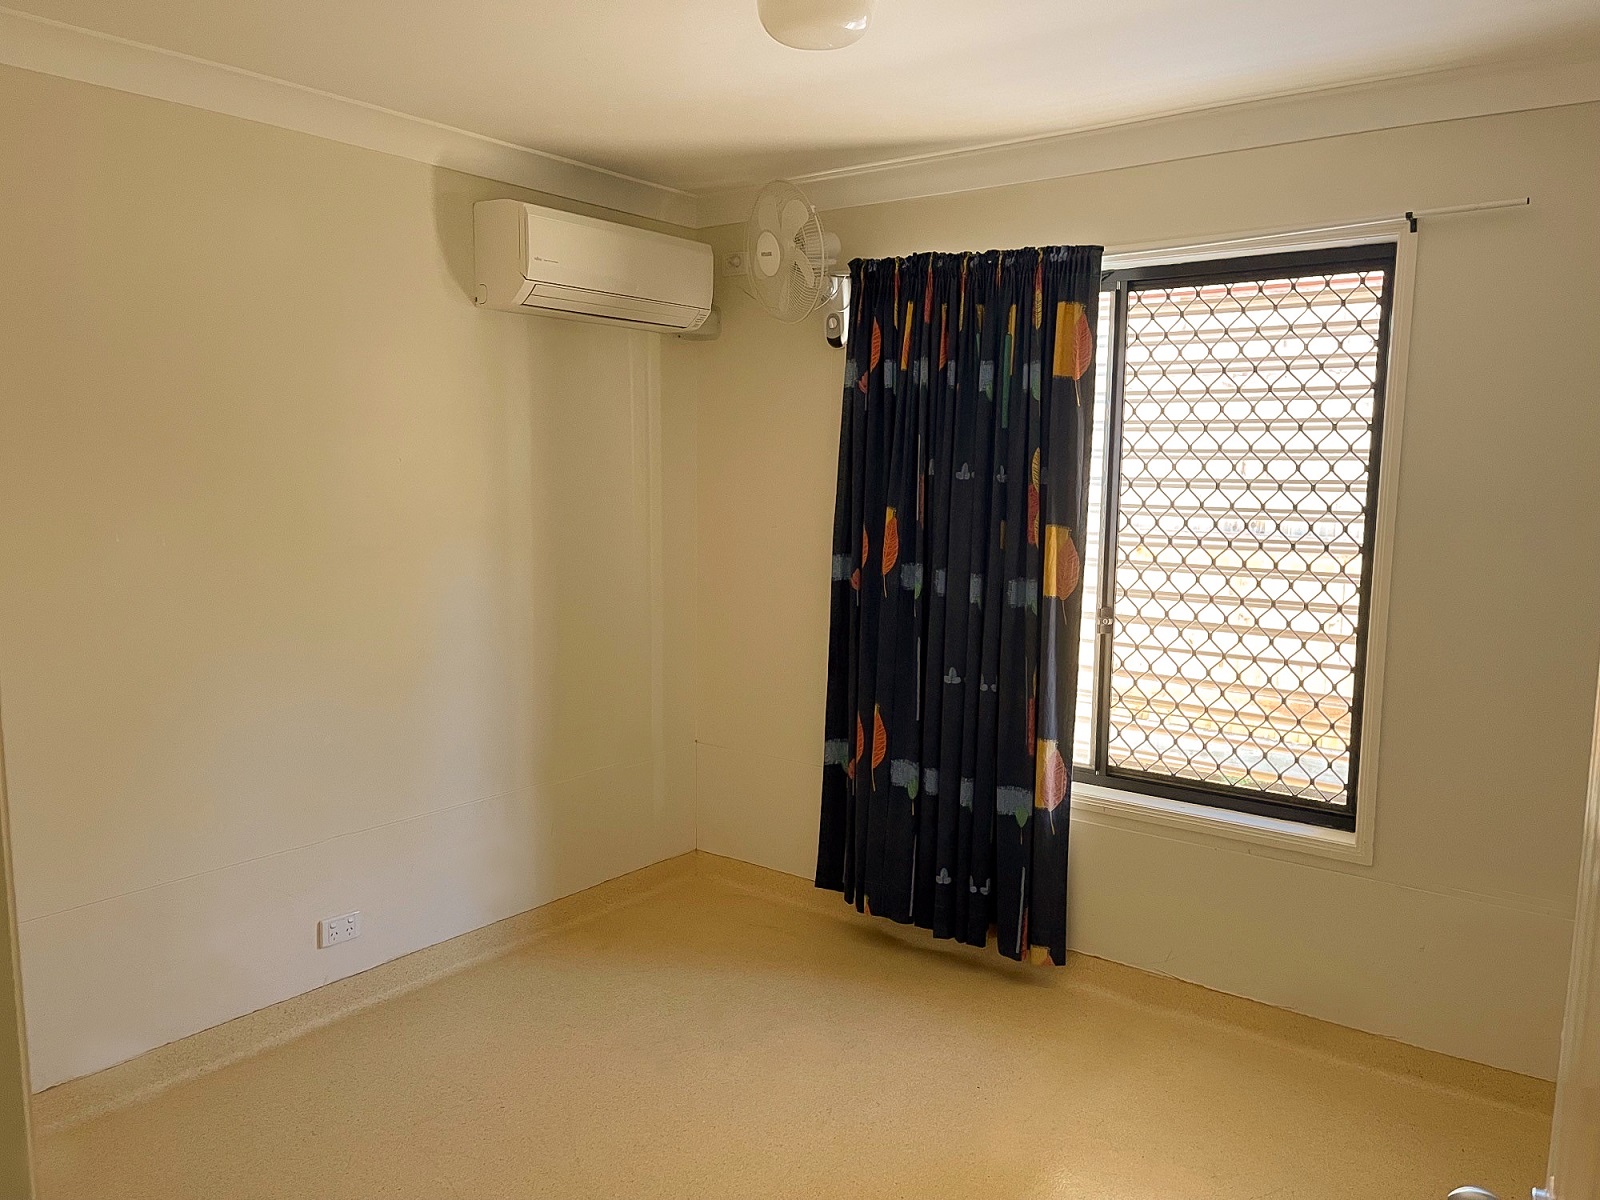 SIL Vacancy in Sunshine Coast showing the vacant bedroom